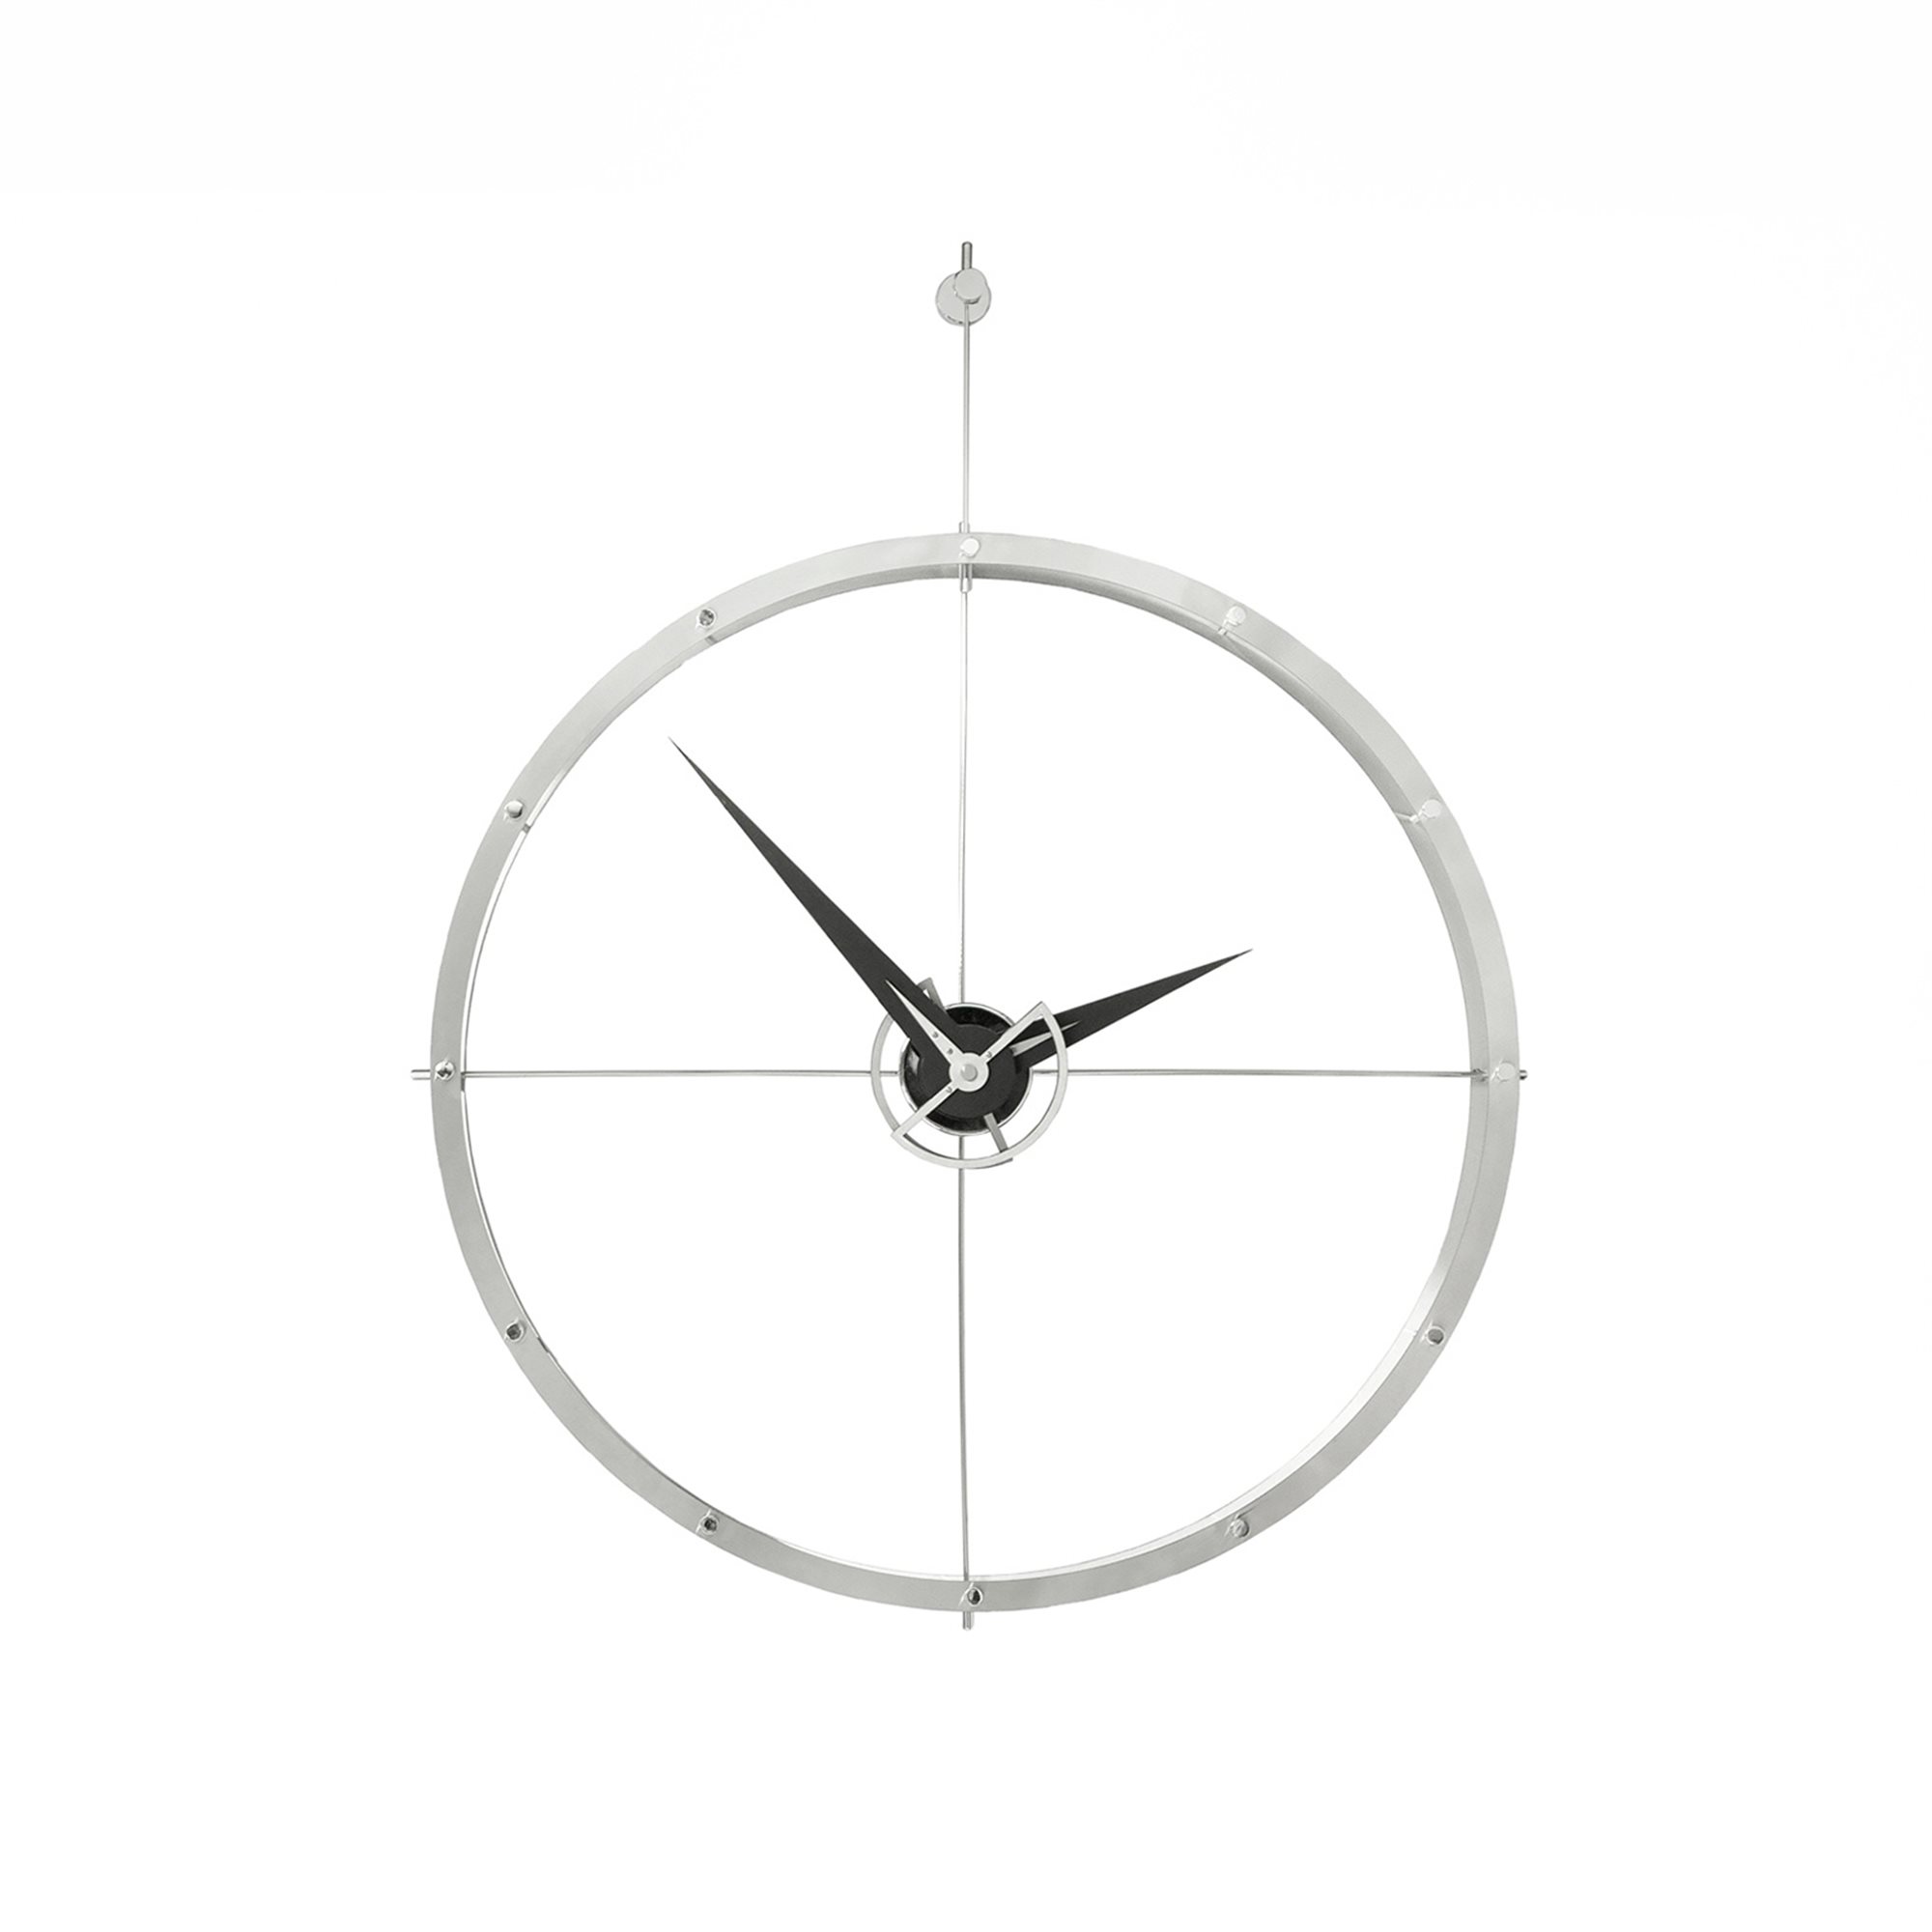 Double Ring Wall Clock (69 cm) - Stainless Steel